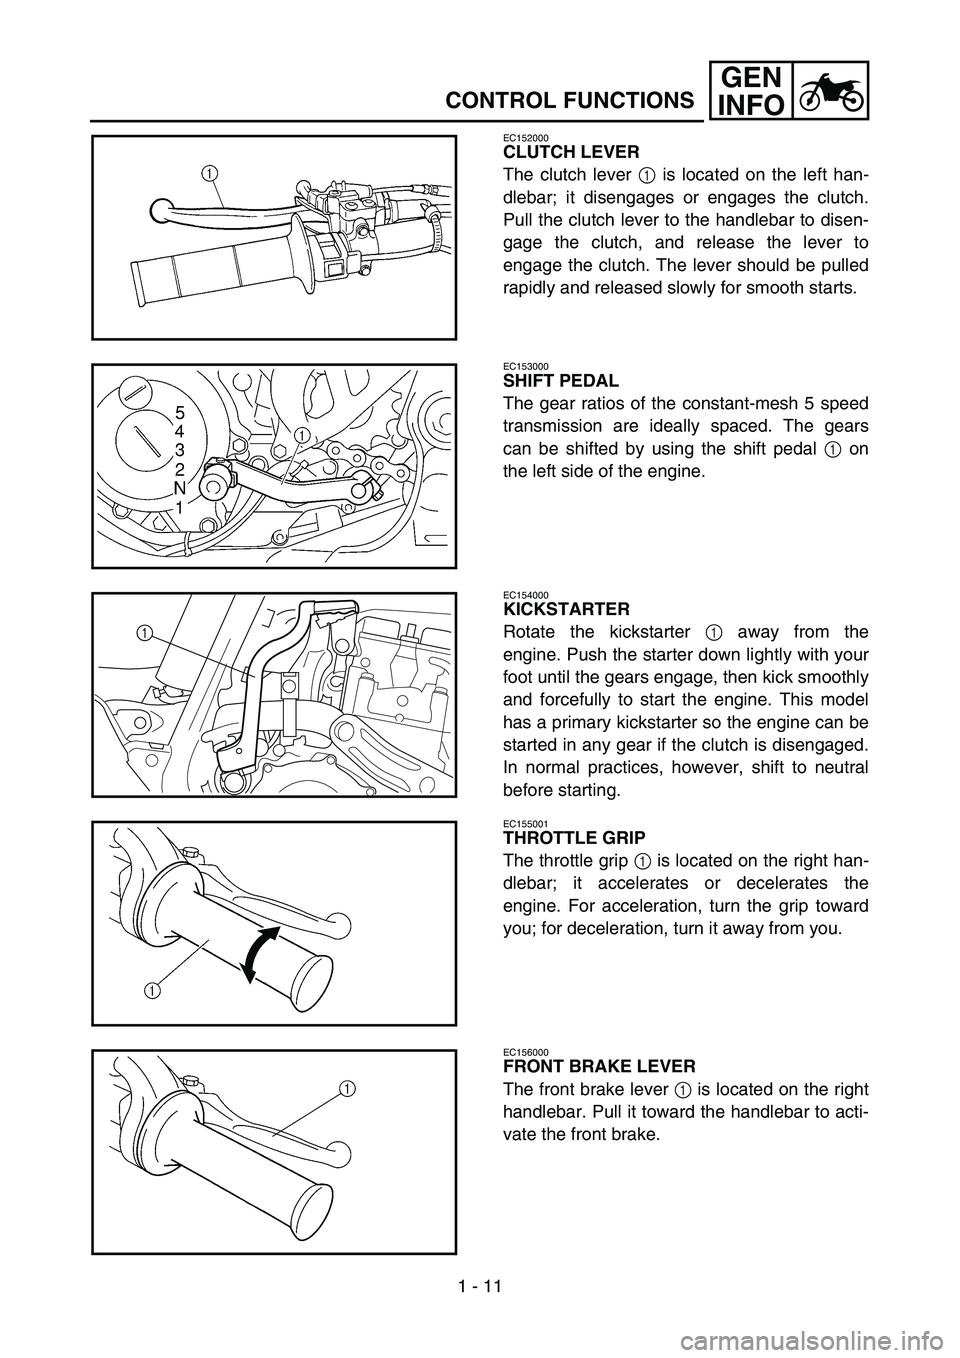 YAMAHA WR 450F 2007  Manuale de Empleo (in Spanish) 1 - 11
GEN
INFO
CONTROL FUNCTIONS
EC152000
CLUTCH LEVER
The clutch lever 1 is located on the left han-
dlebar; it disengages or engages the clutch.
Pull the clutch lever to the handlebar to disen-
gag